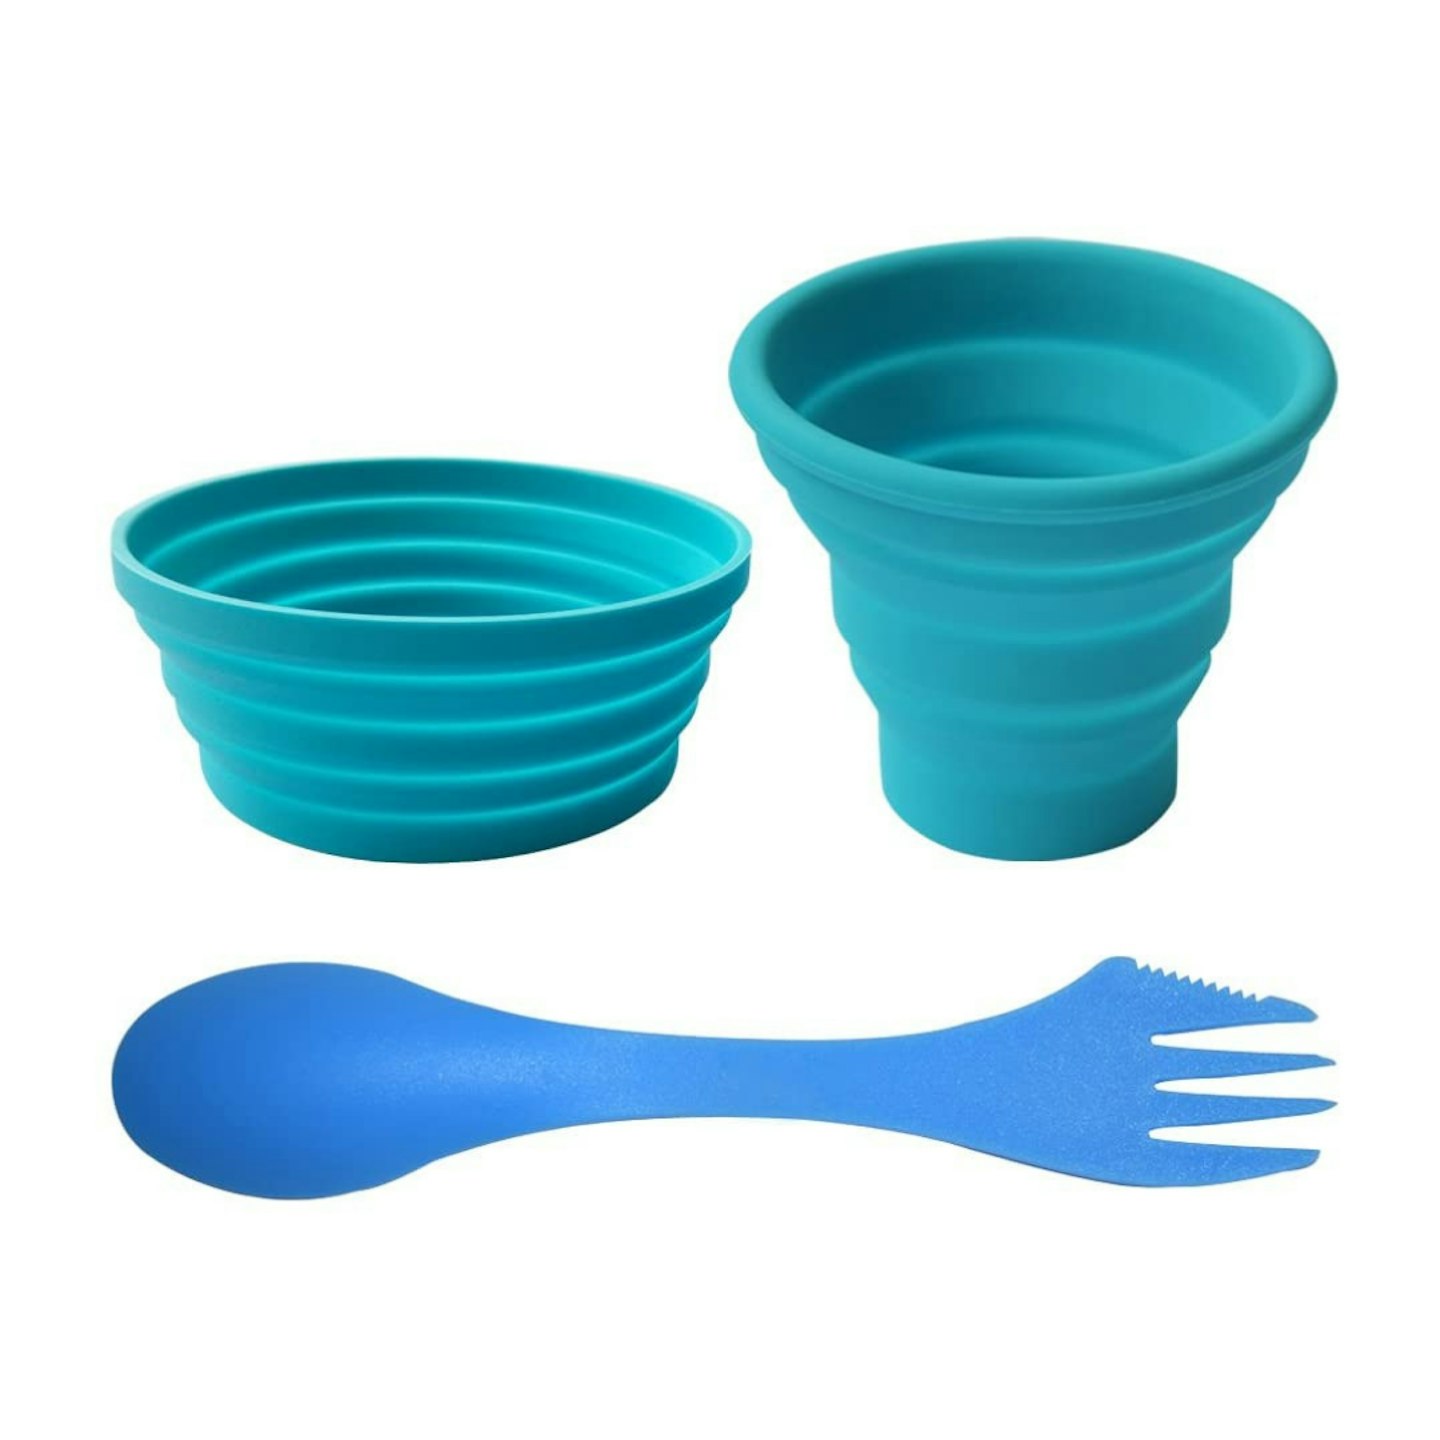 Ecoart Silicone Collapsible Cup and Bowl Set with Spork